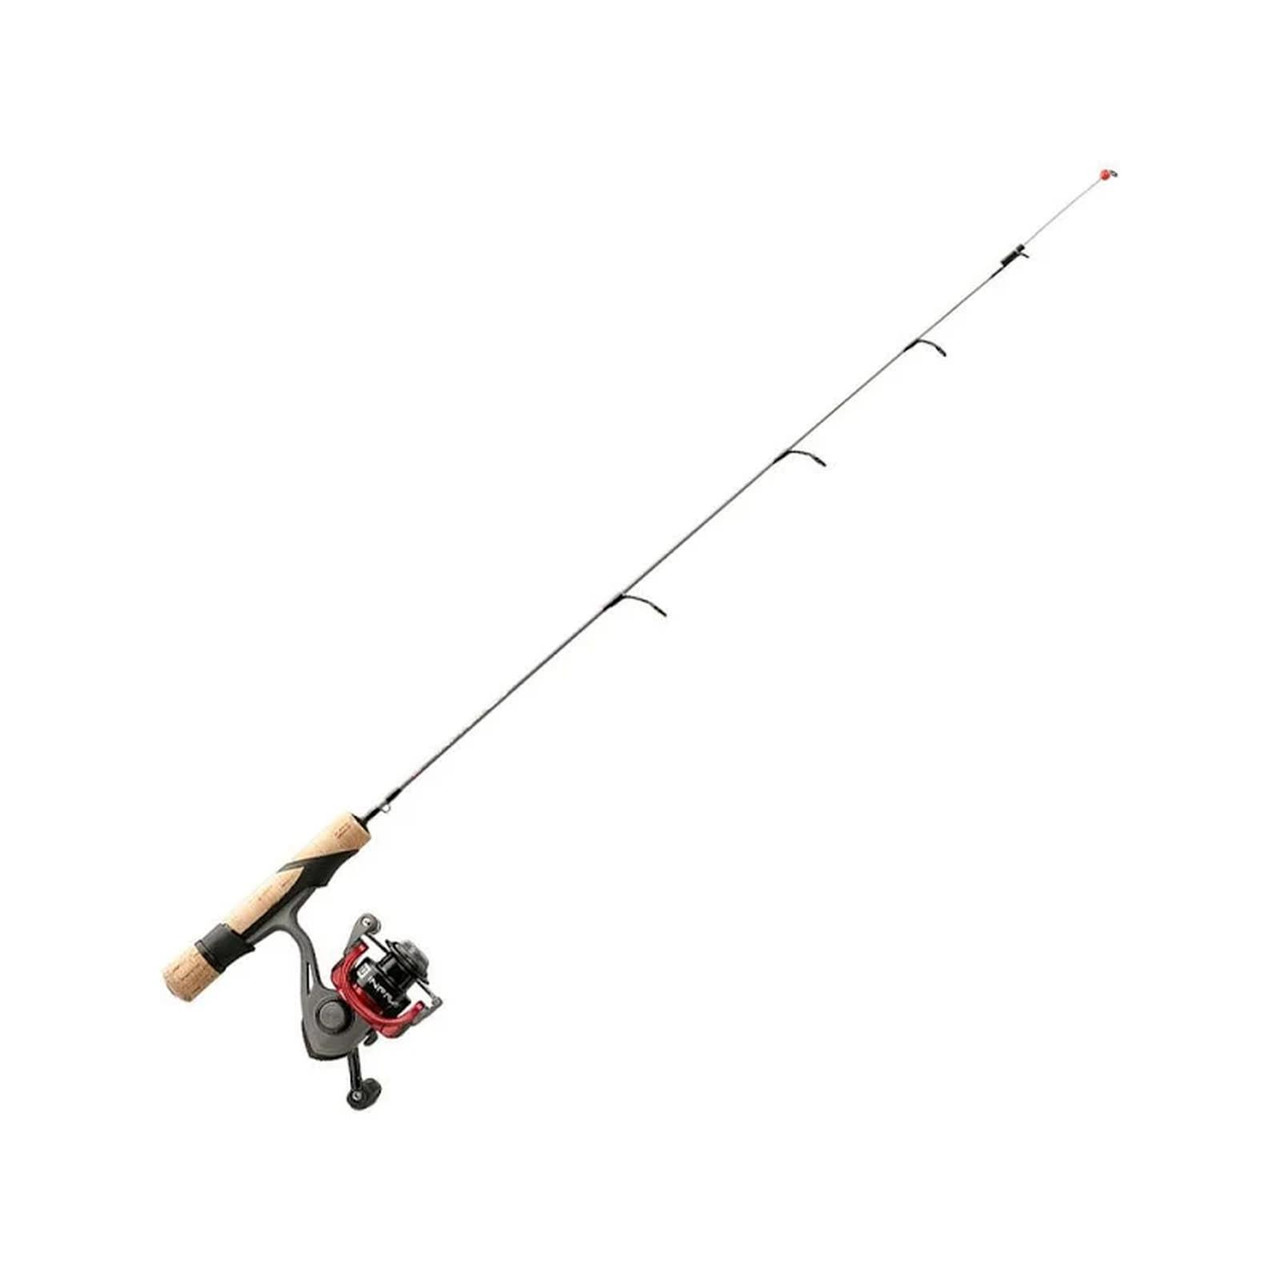 13 Fishing Infrared Ice Fishing Spinning Combo - 25 Light, IC3-25L